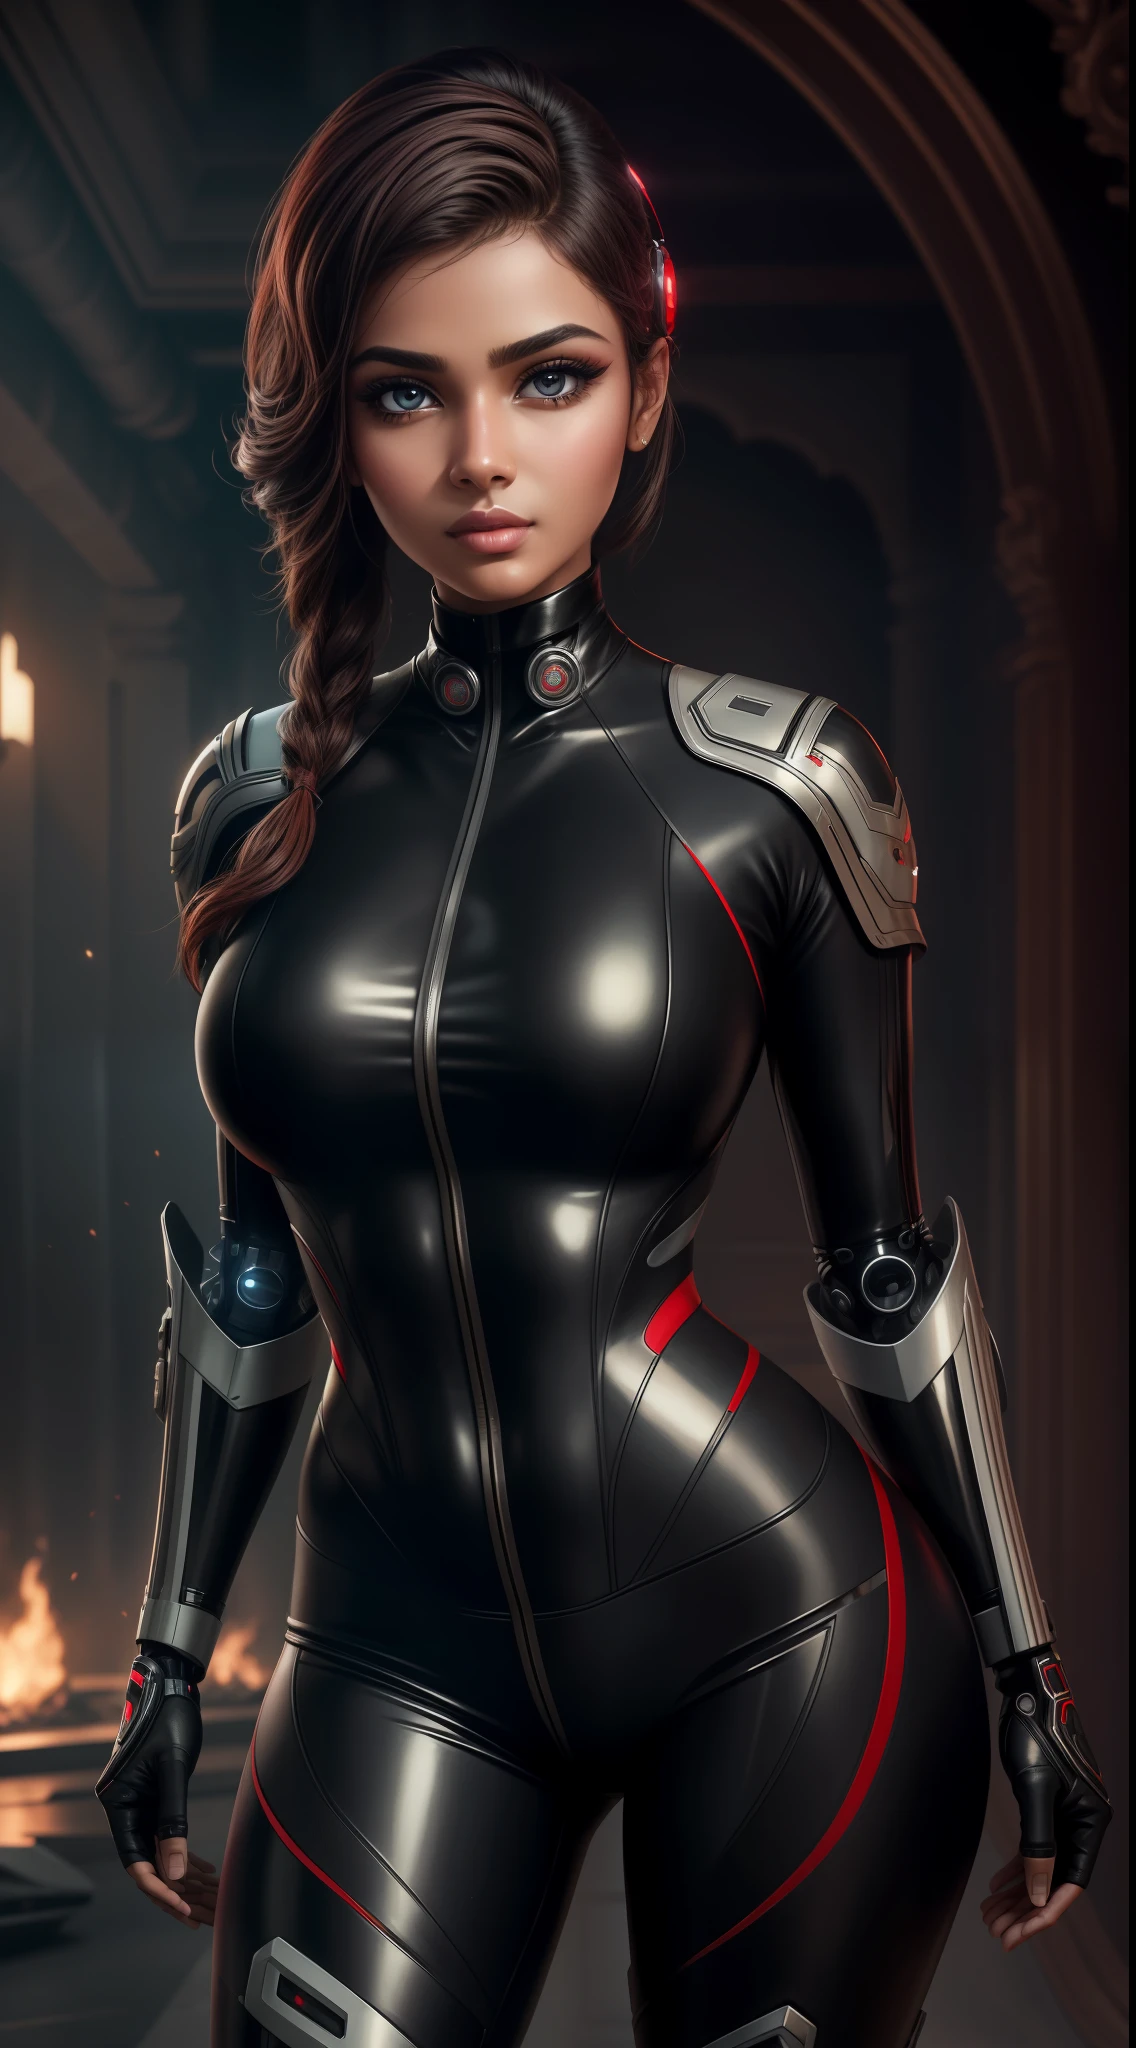 solo, super fine photo, portrait Unreal Engine 5 8K UHD of a couple, red and black color scheme tight cybernetic latex catsuit, 25 years old Indian girl, beautiful face, big breasts, curvy, very beautiful face, random hairstyles, feminine curves, cybernetic glove, futuristic design, super lighting, beautiful make up, luxurious, best quality, masterpiece, official art, unified 8k wallpaper, super detailed, beautiful face eyes nose lips, sharp focus, dynamic pose, beautiful body, high res, full body photo